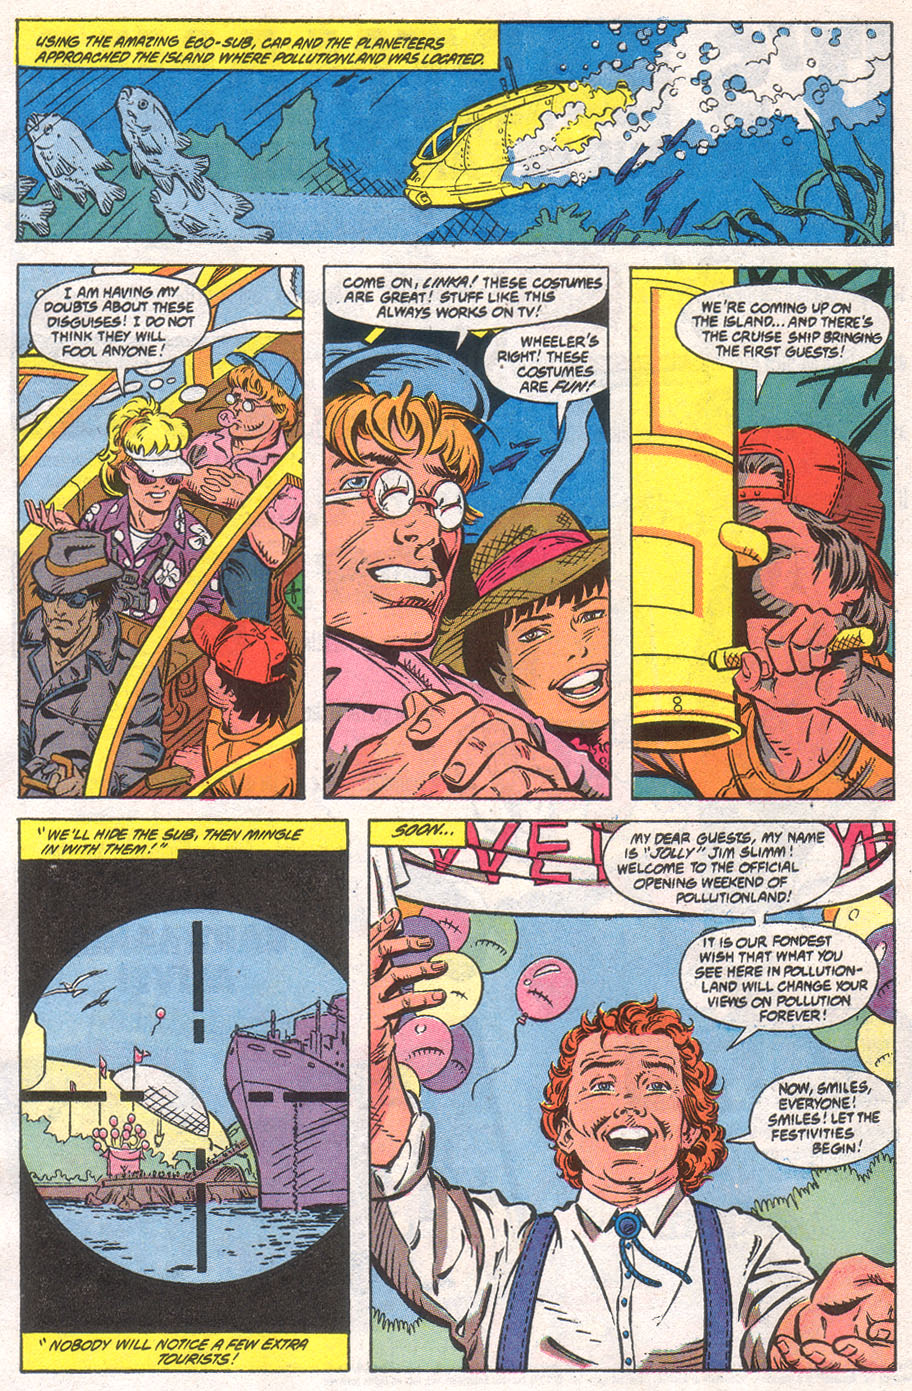 Captain Planet and the Planeteers 5 Page 8